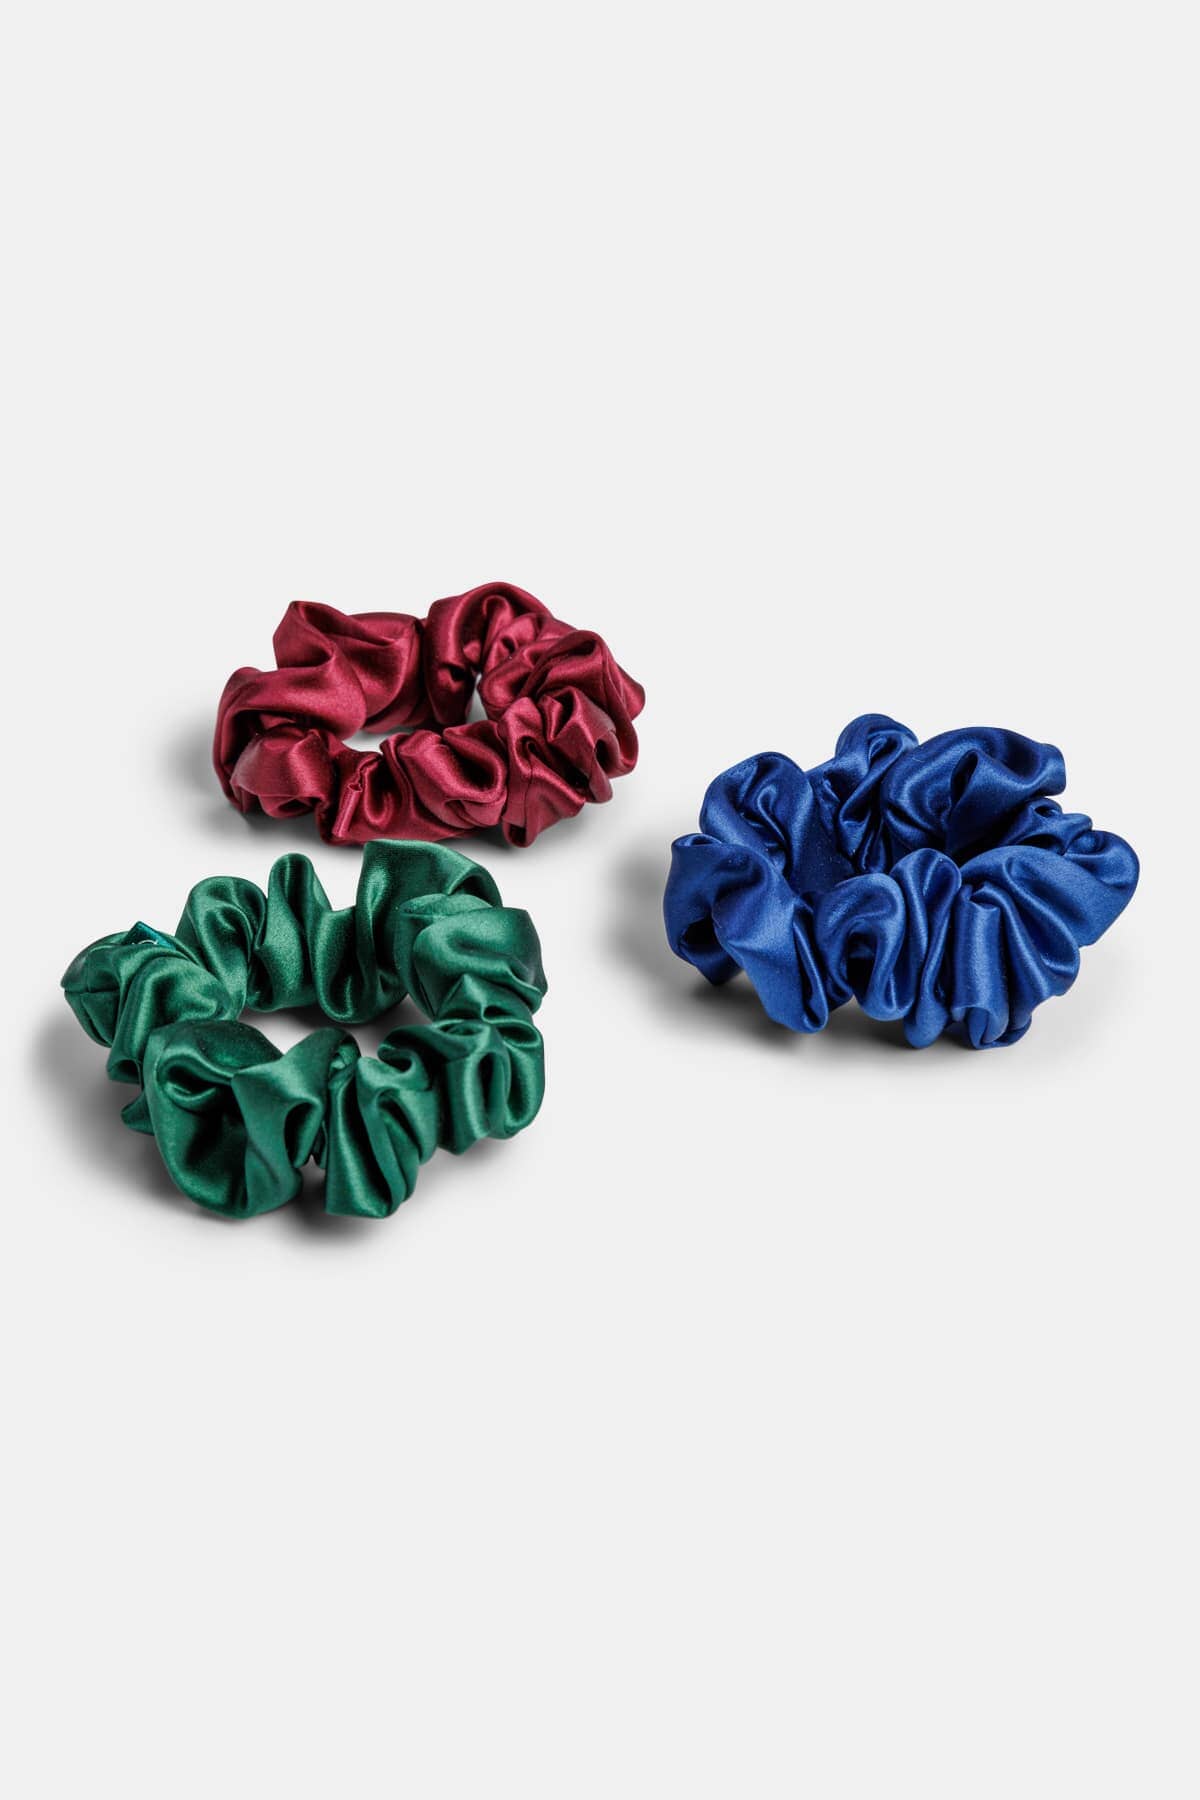 100% Pure Mulberry Silk Hair Scrunchies with Gift Box - Set of 3 Large Hair Ties Womens&gt;Beauty&gt;Hair Care Fishers Finery Navy-Hunter Green-Burgundy 